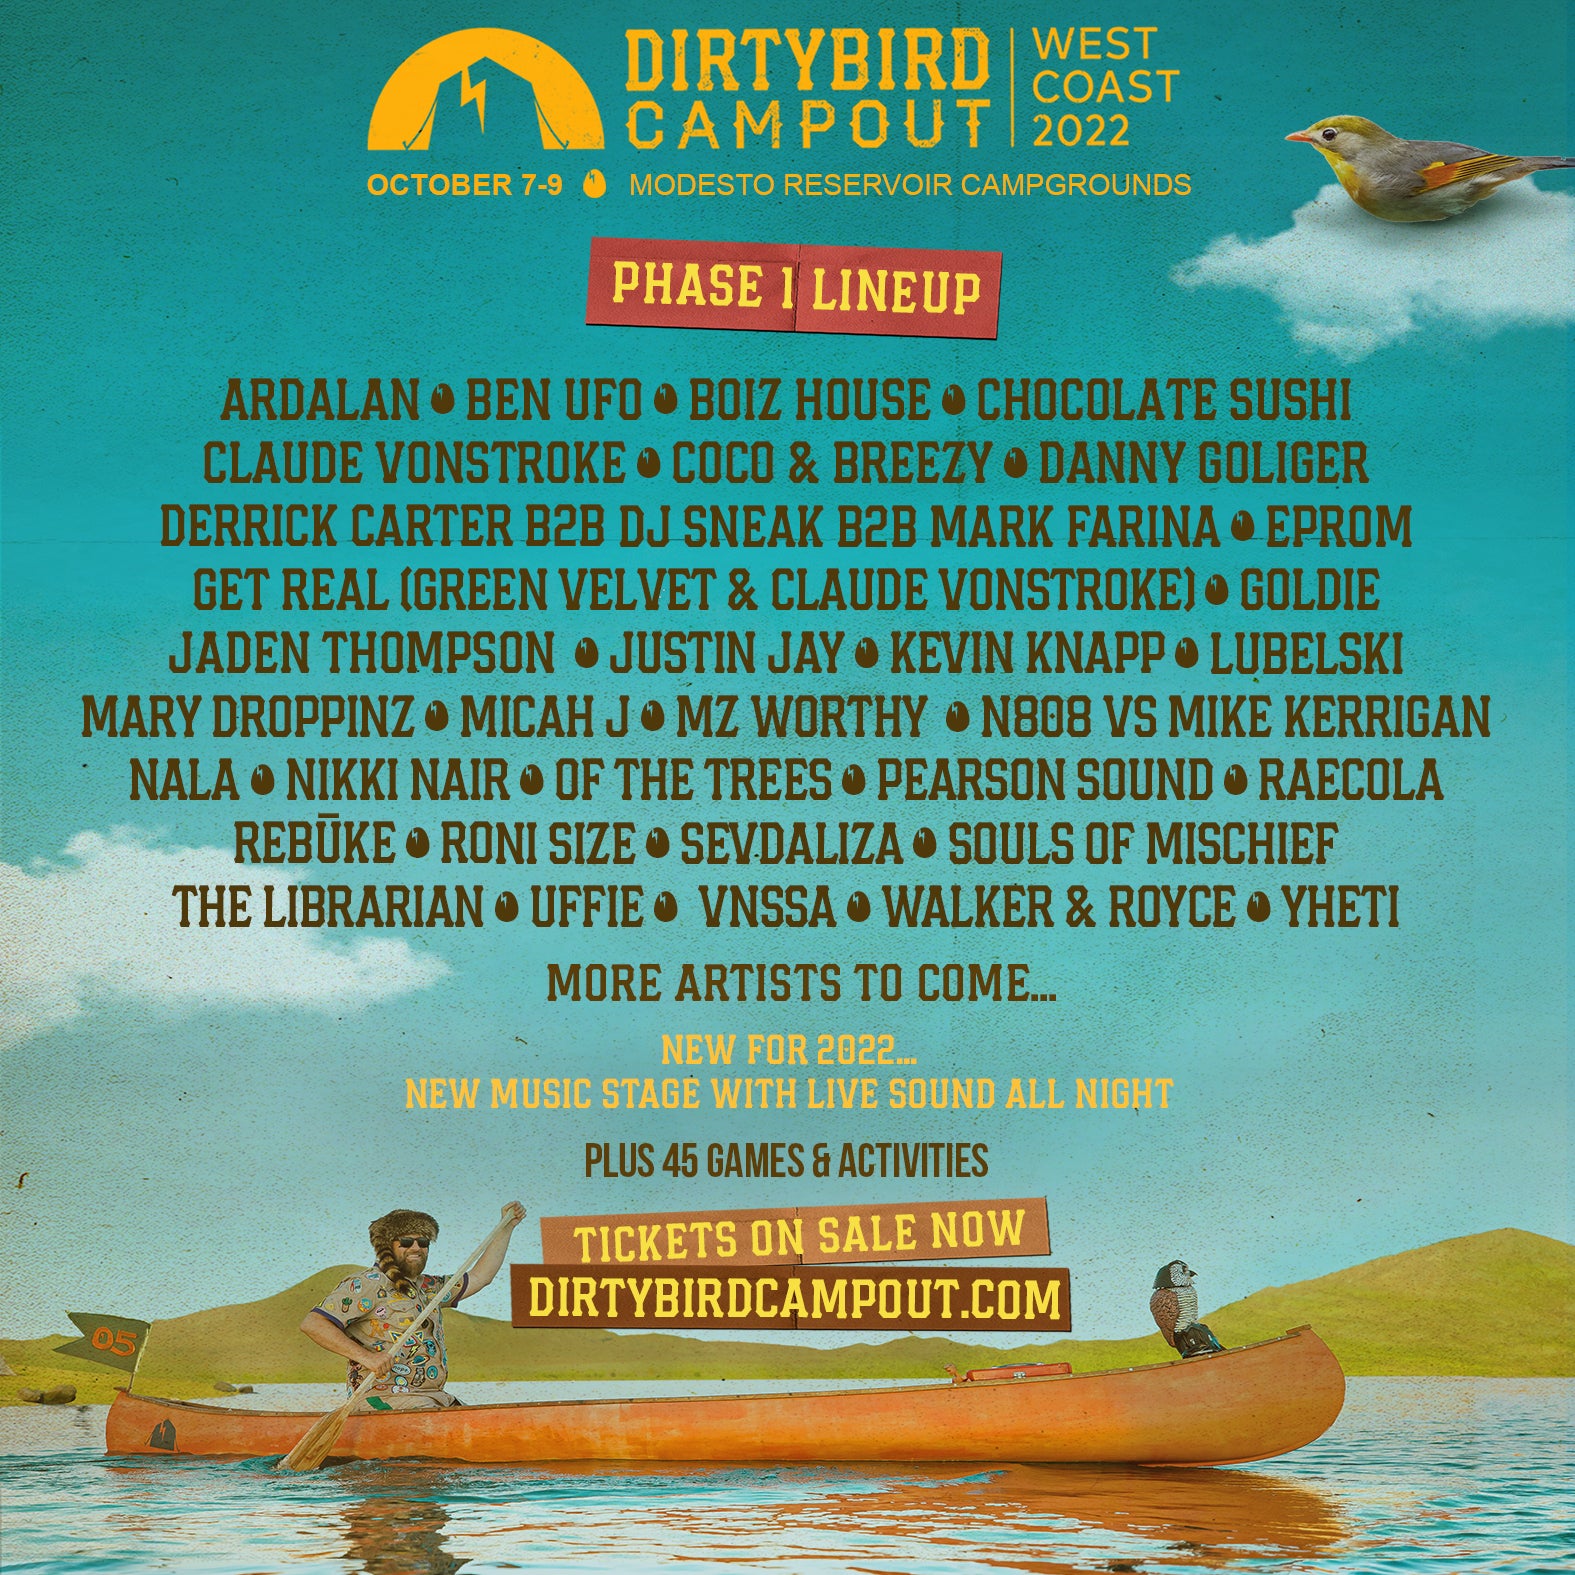 Dirtybird Campout announces Claude VonStroke, Get Real, Eprom, Walker & Royce, VNSSA, Yheti, Of The Trees, Rebūke, Nala + more for initial 2022 lineup